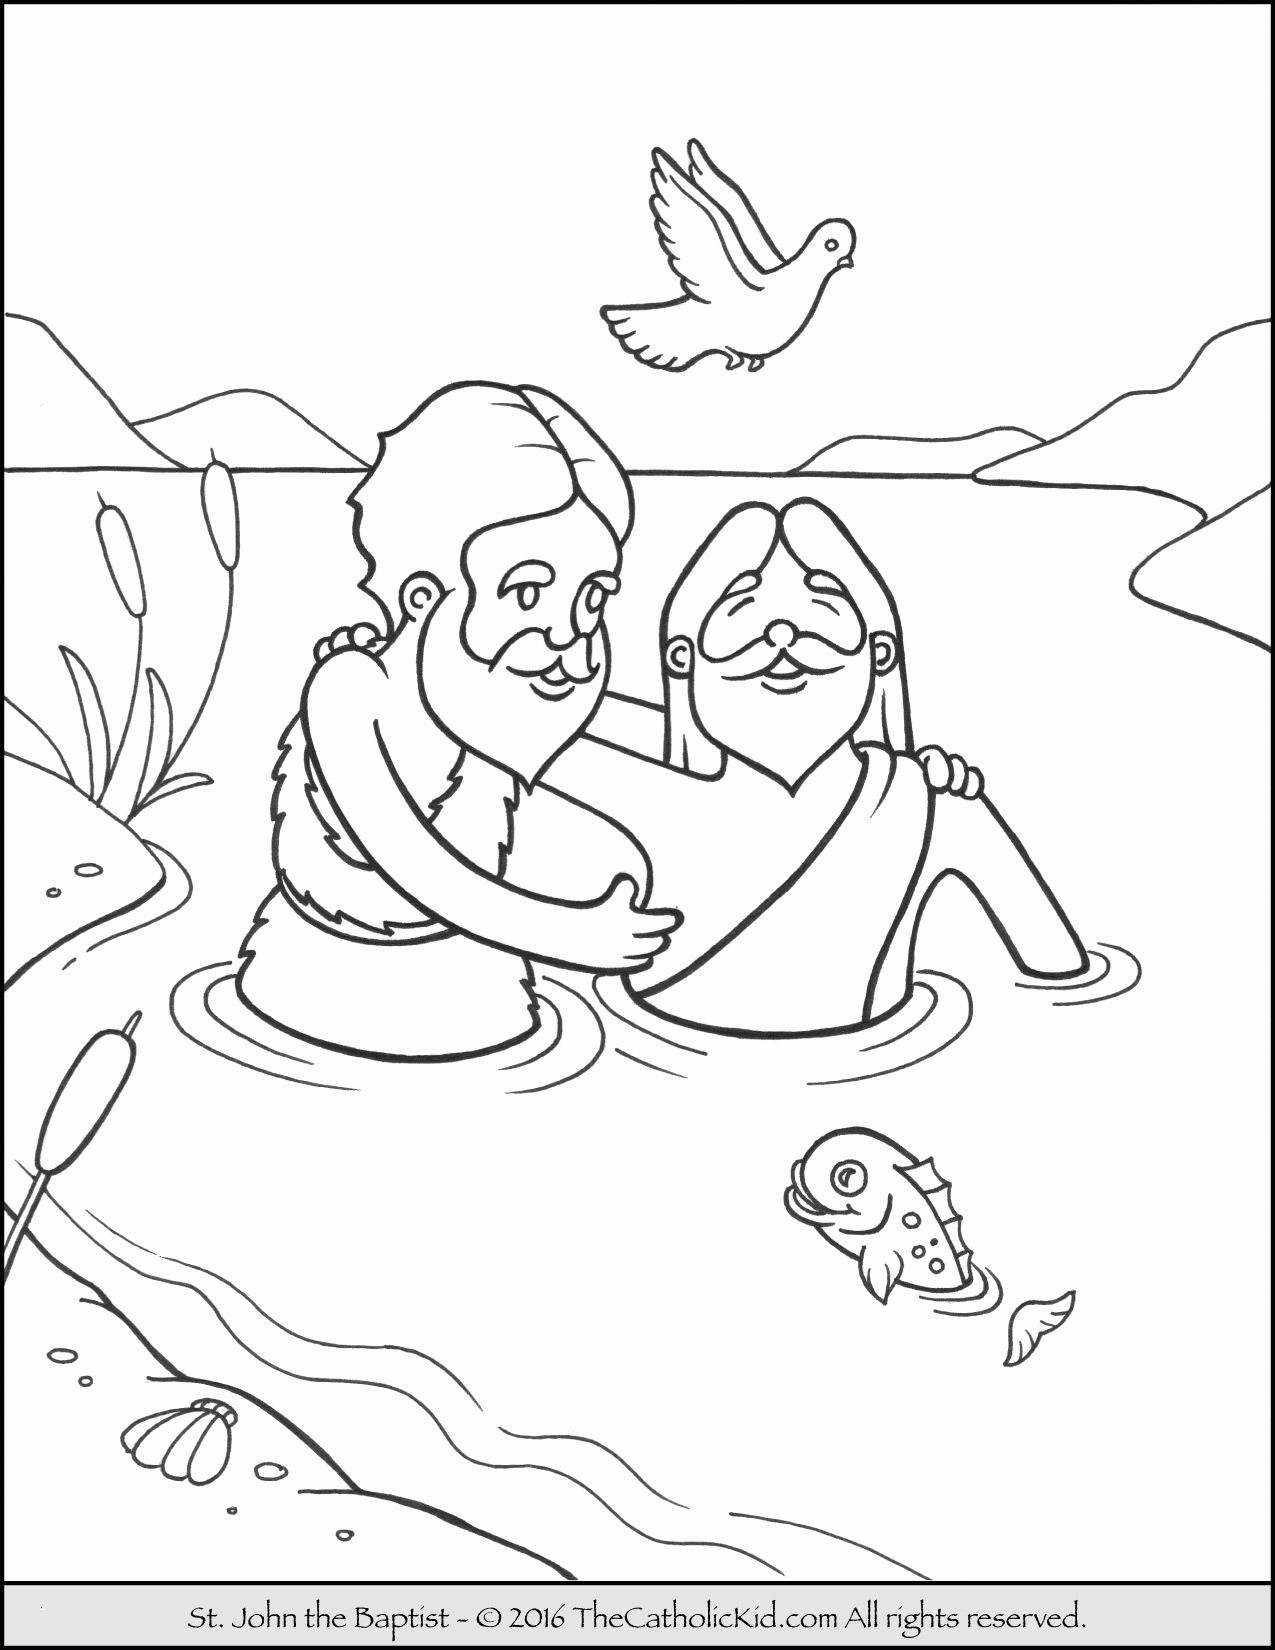 Barnabas Coloring Page Coloring Pages For Kids Part 5